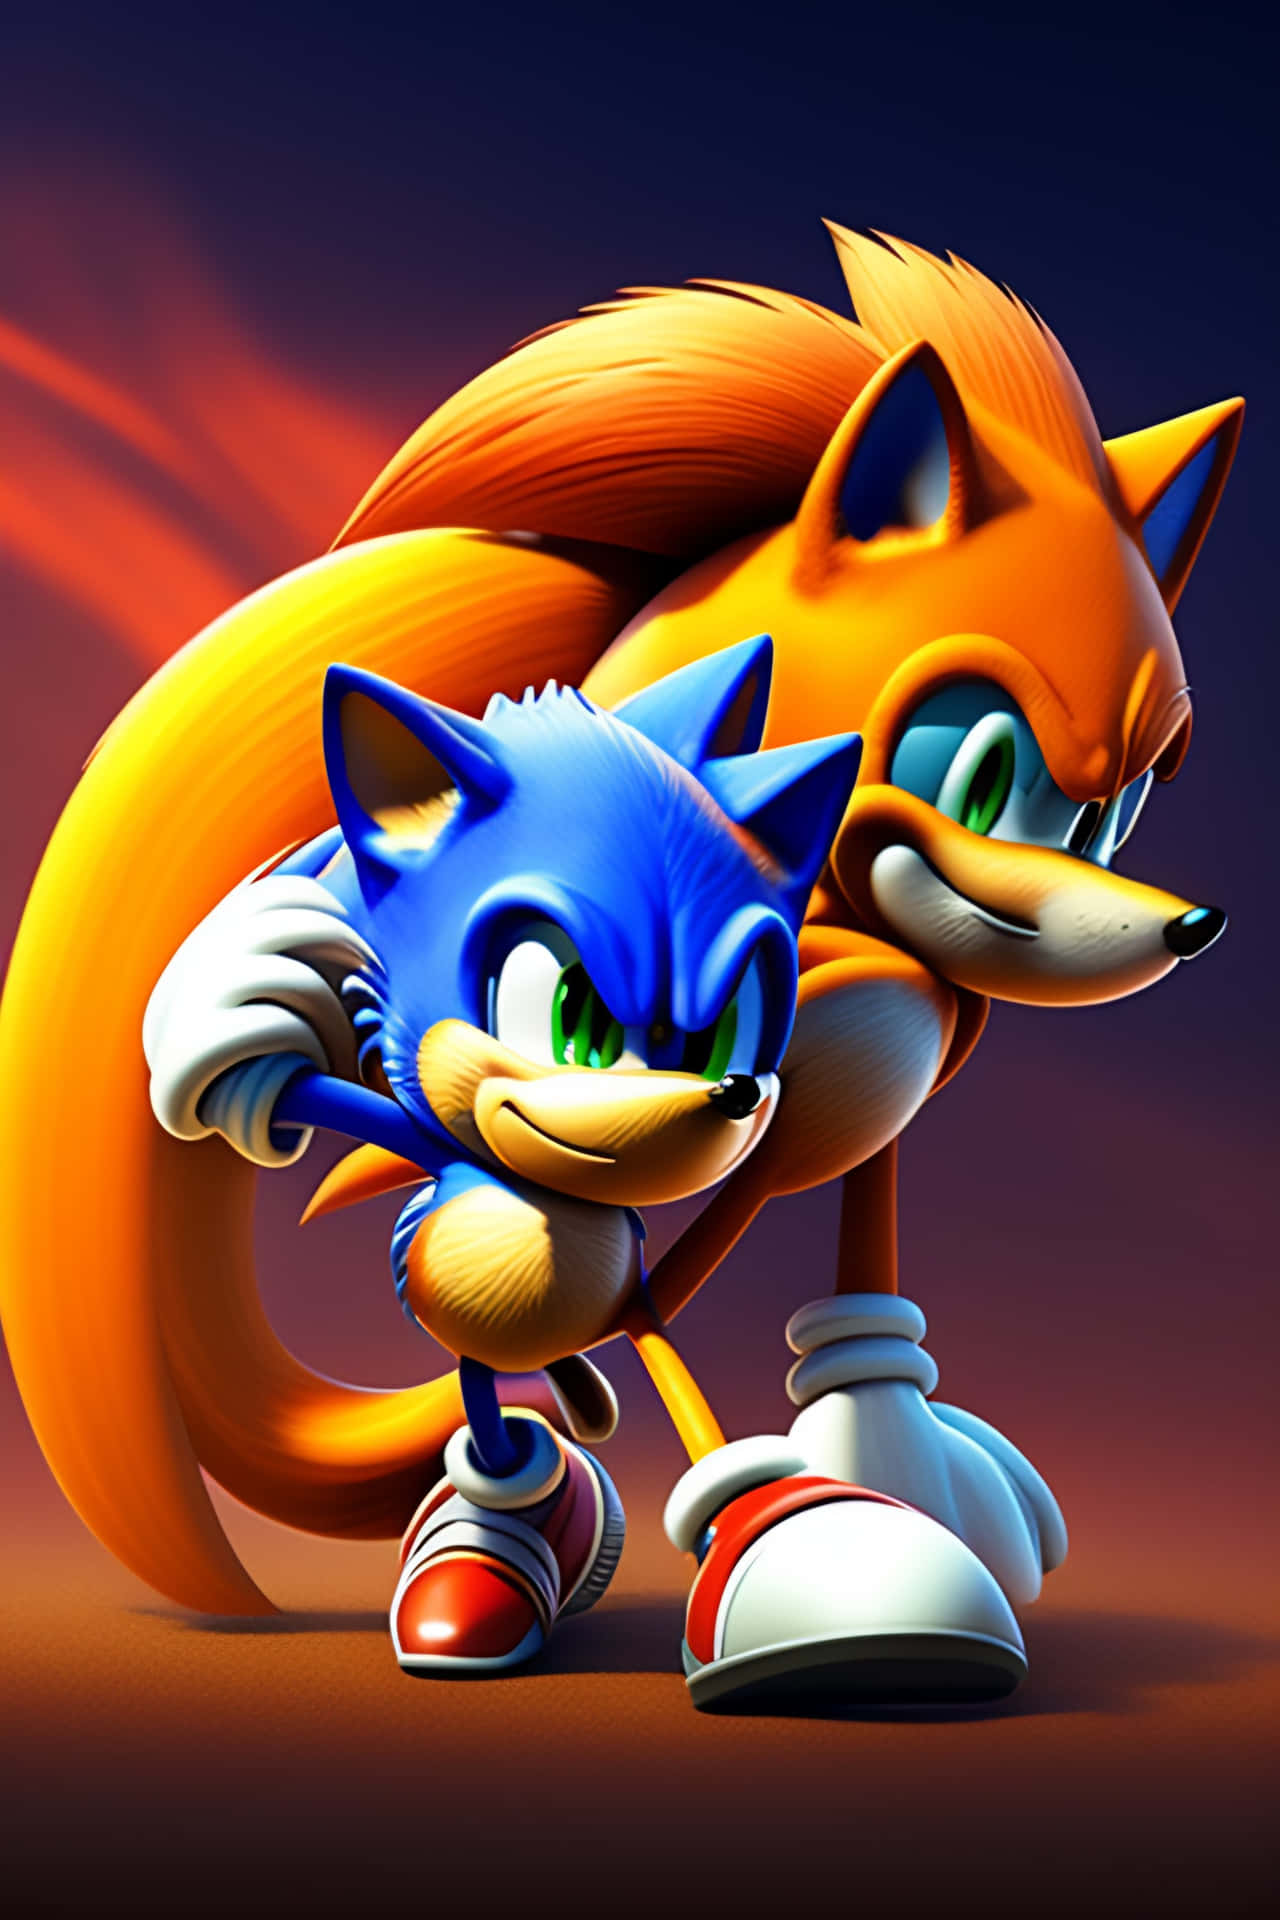 Sonic and Tails striking a pose together Wallpaper